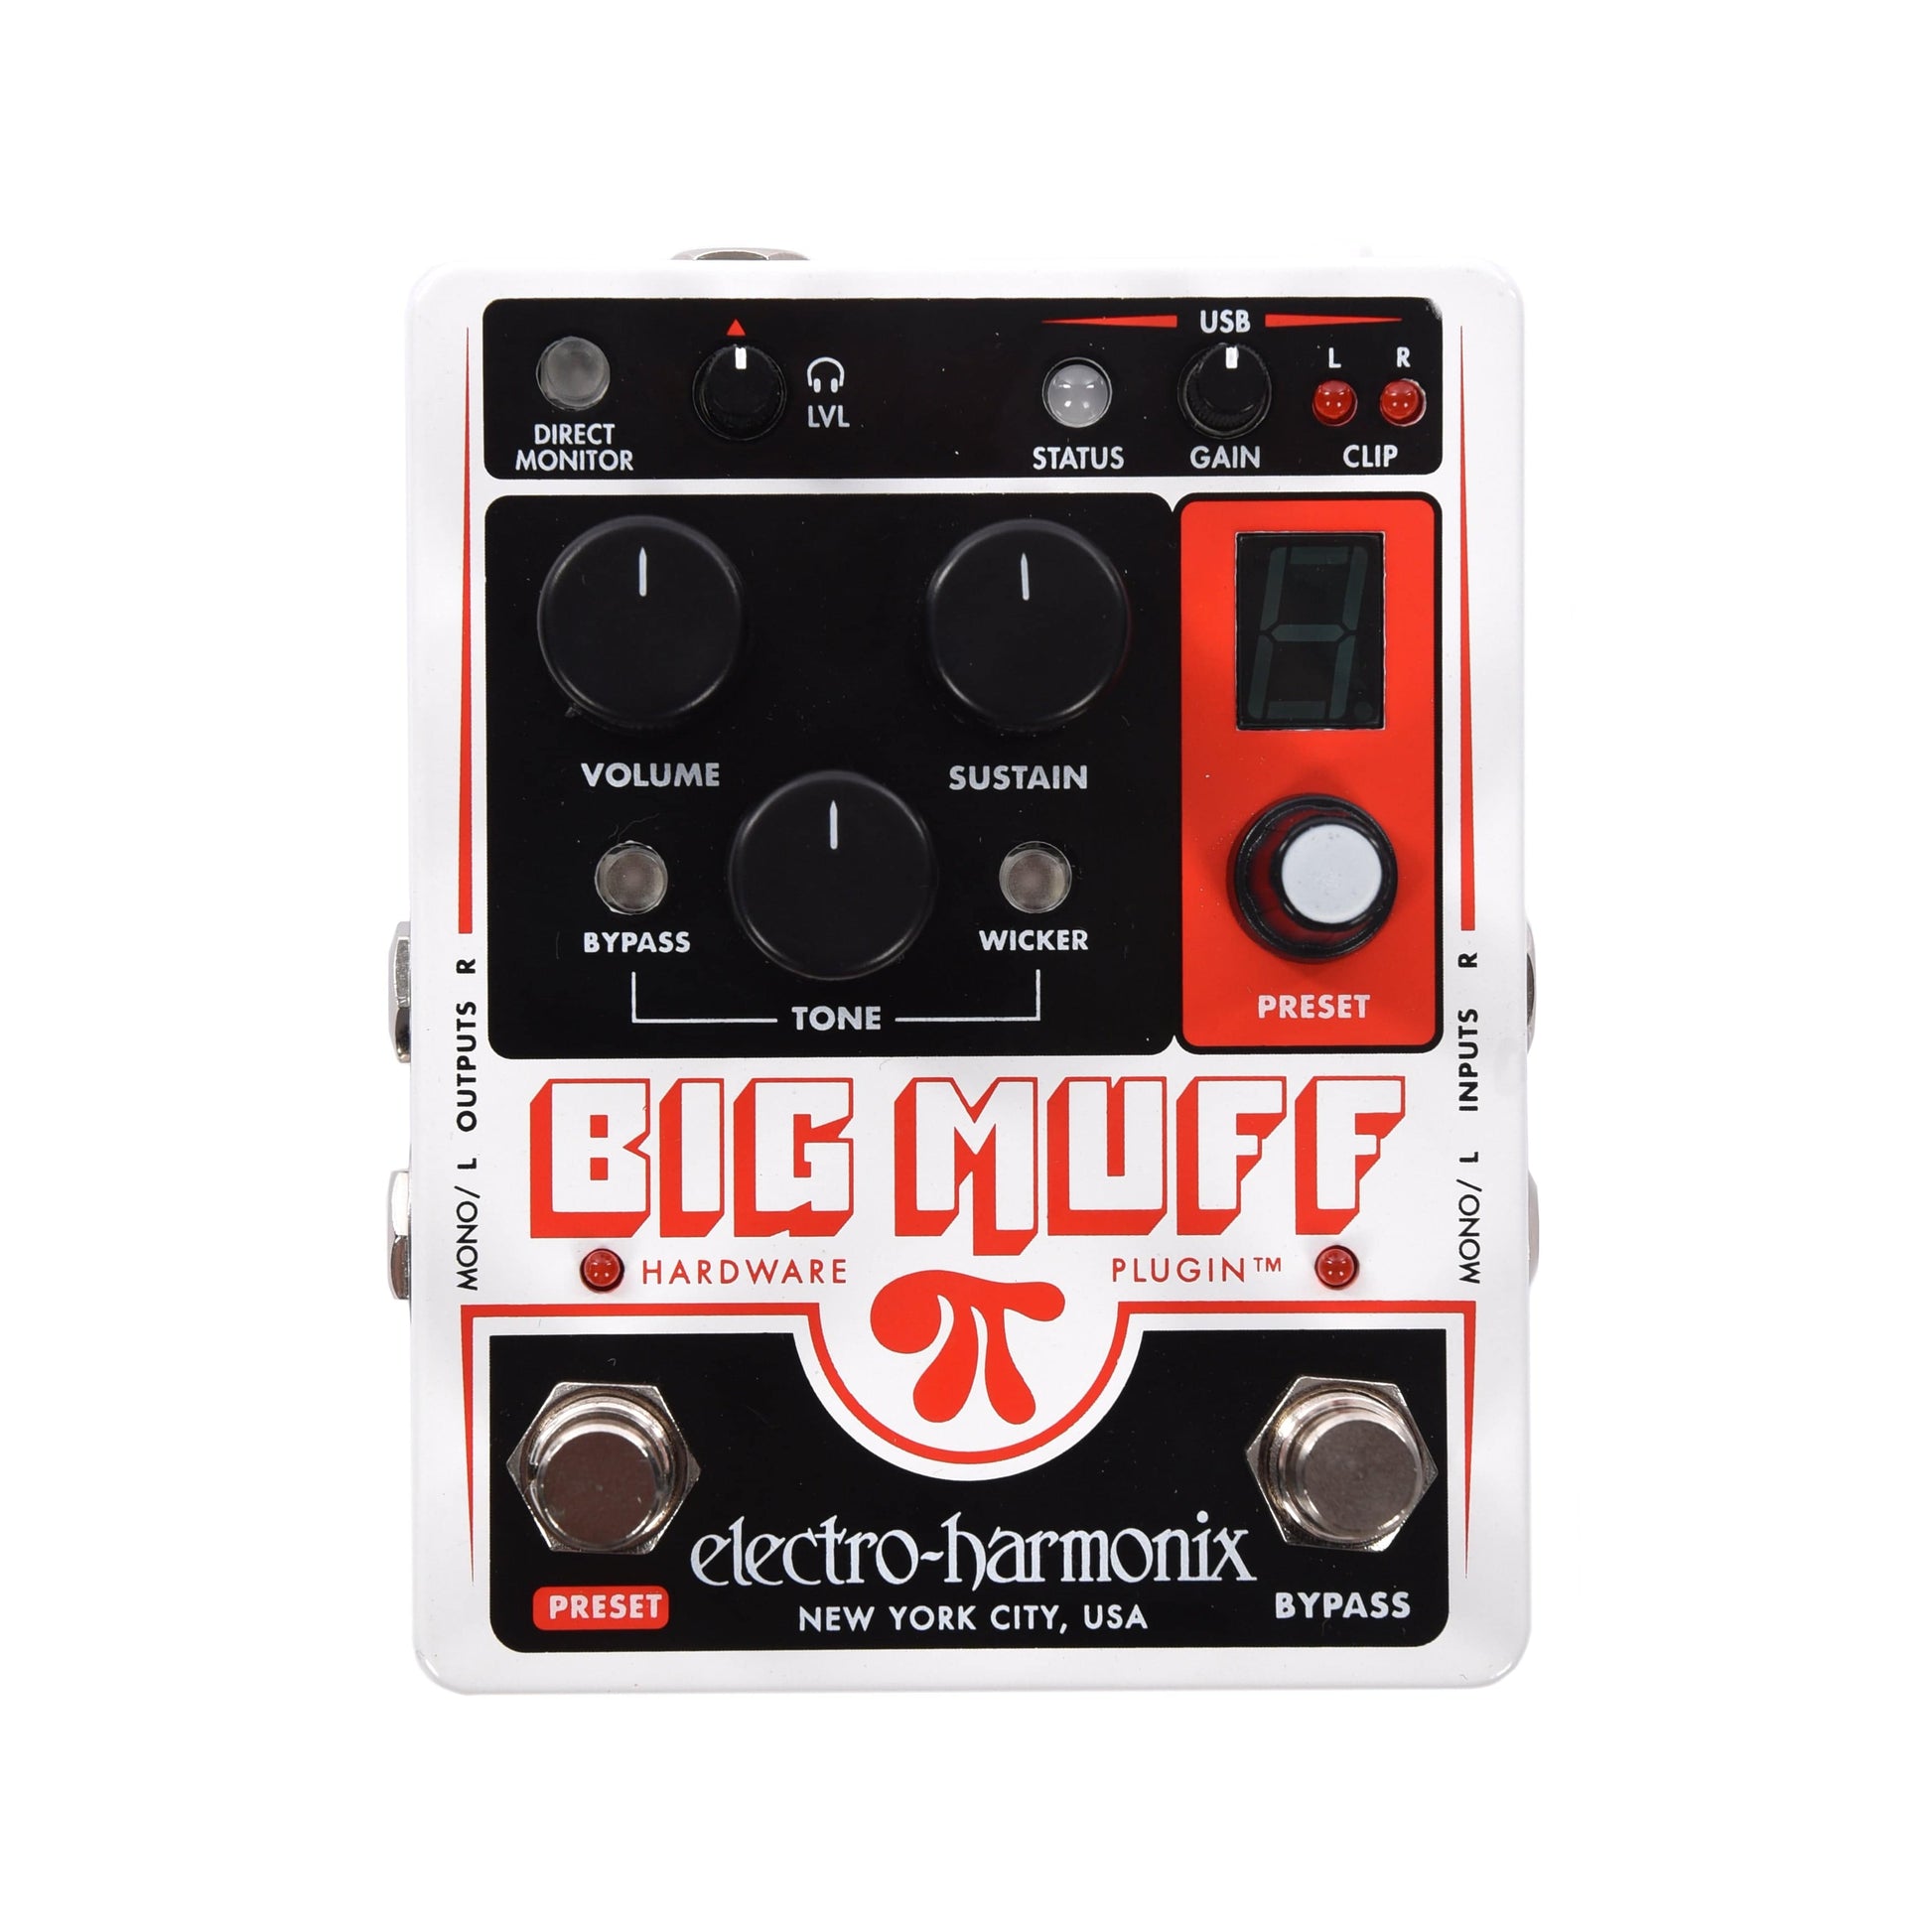 Electro-Harmonix Big Muff Pi Hardware Plugin Pedal Effects and Pedals / Fuzz